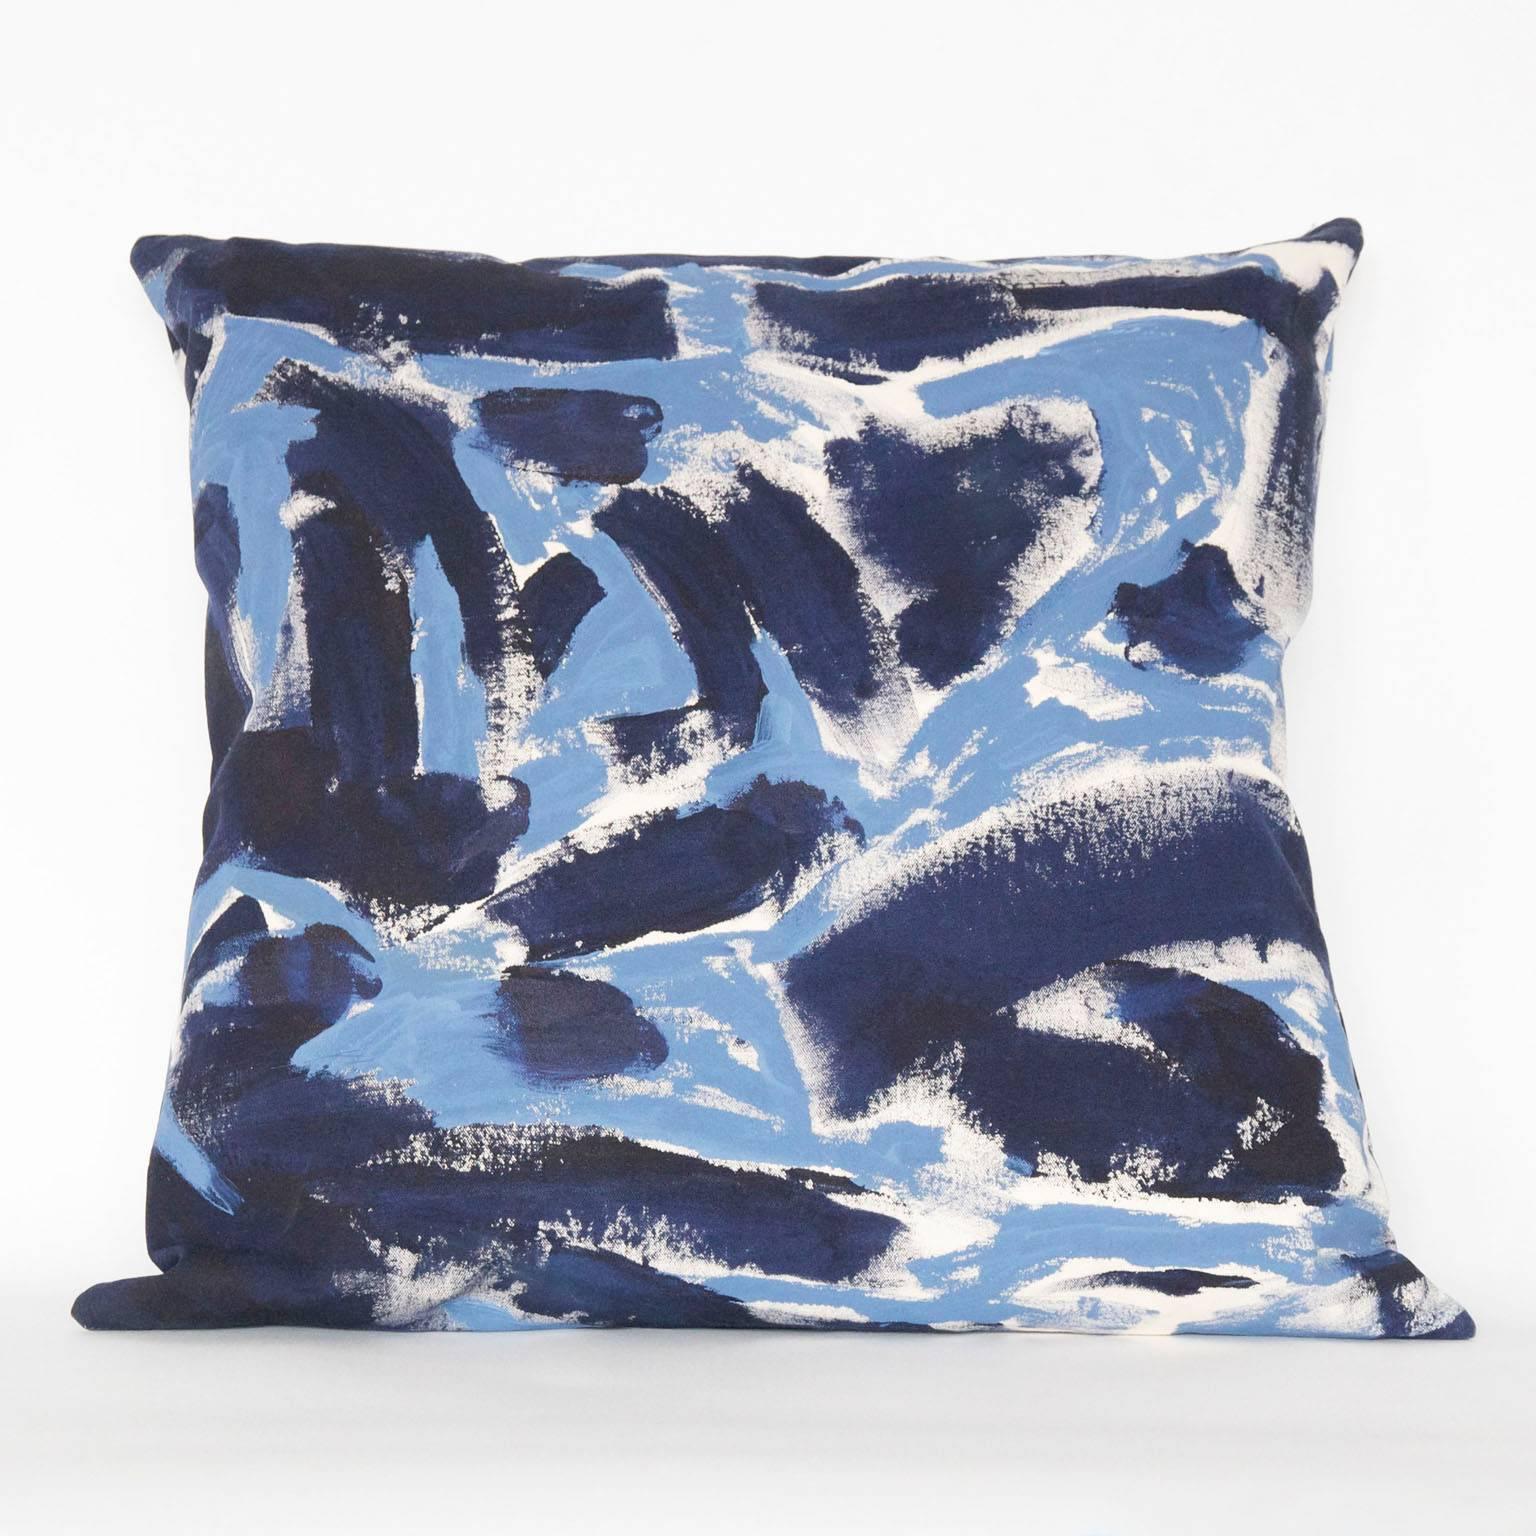 American Blue Two Hue Hand-Painted Canvas Floor Cushion